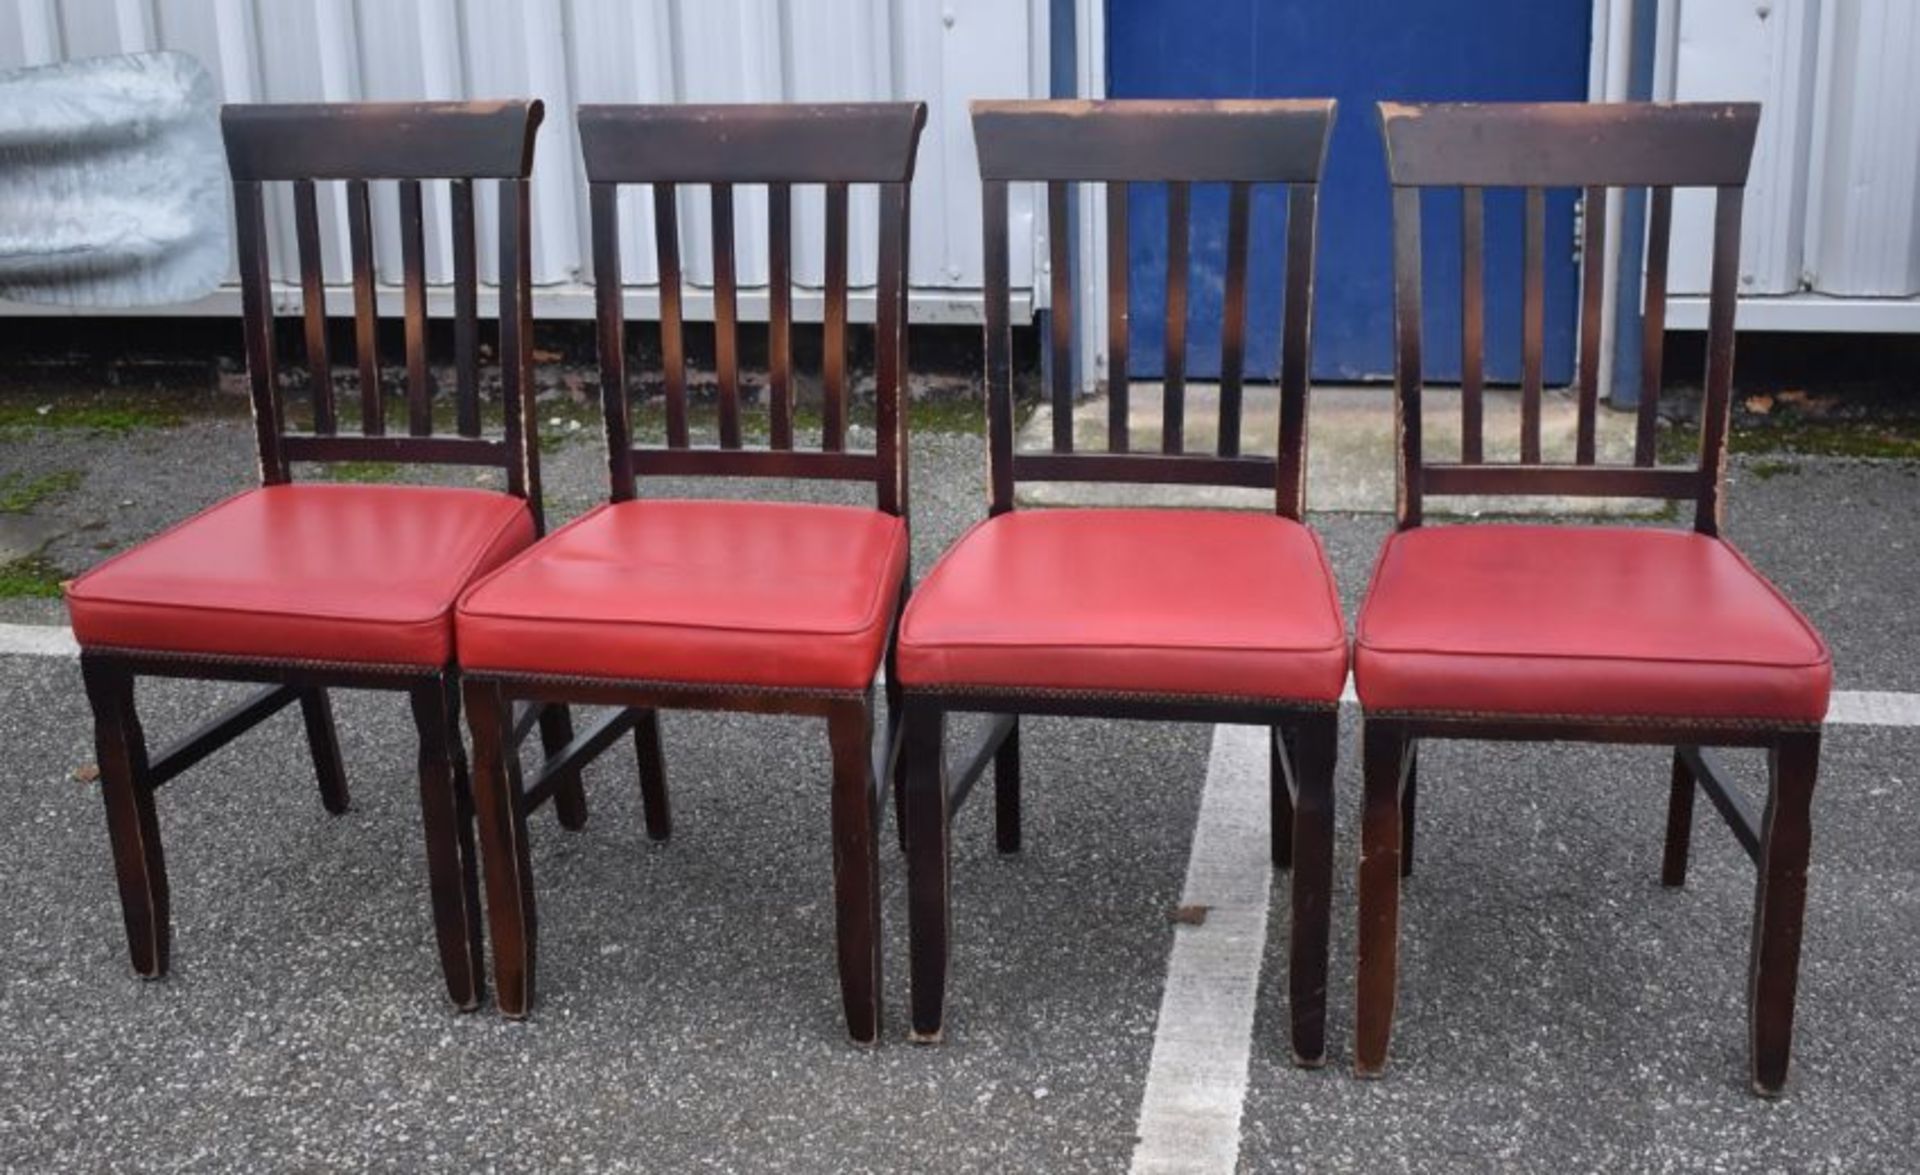 16 x Restaurant Dining Chairs With Dark Stained Wood Finish and Red Leather Seat Pads - Recently - Image 6 of 6